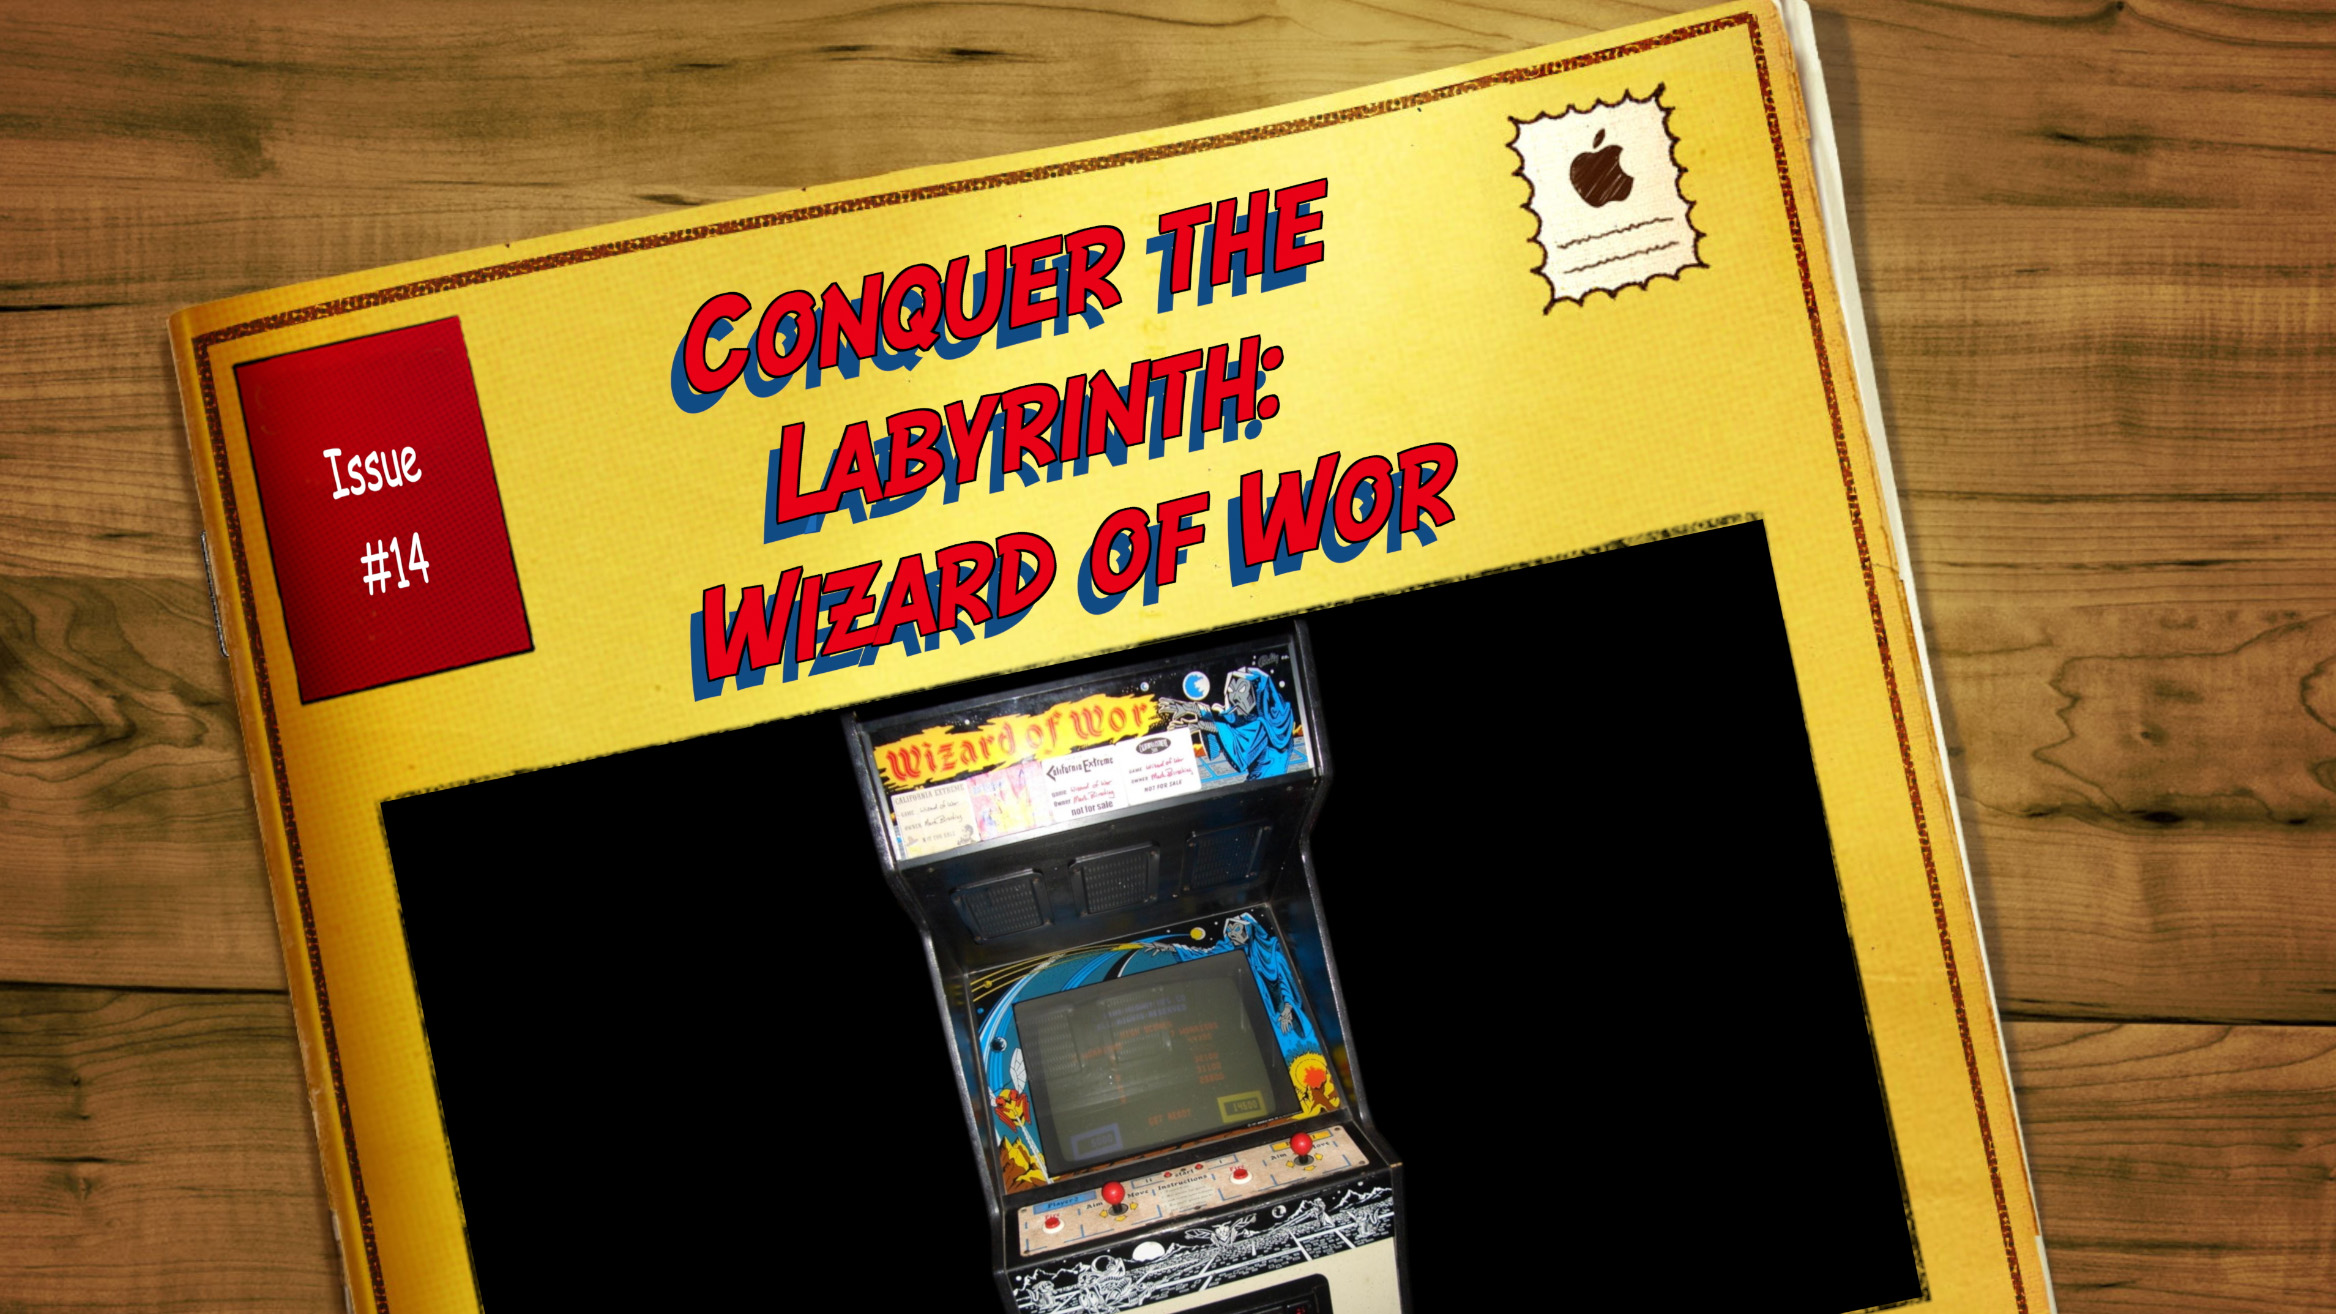 Issue#14 Conquer the Labyrinth: Wizard of Wor